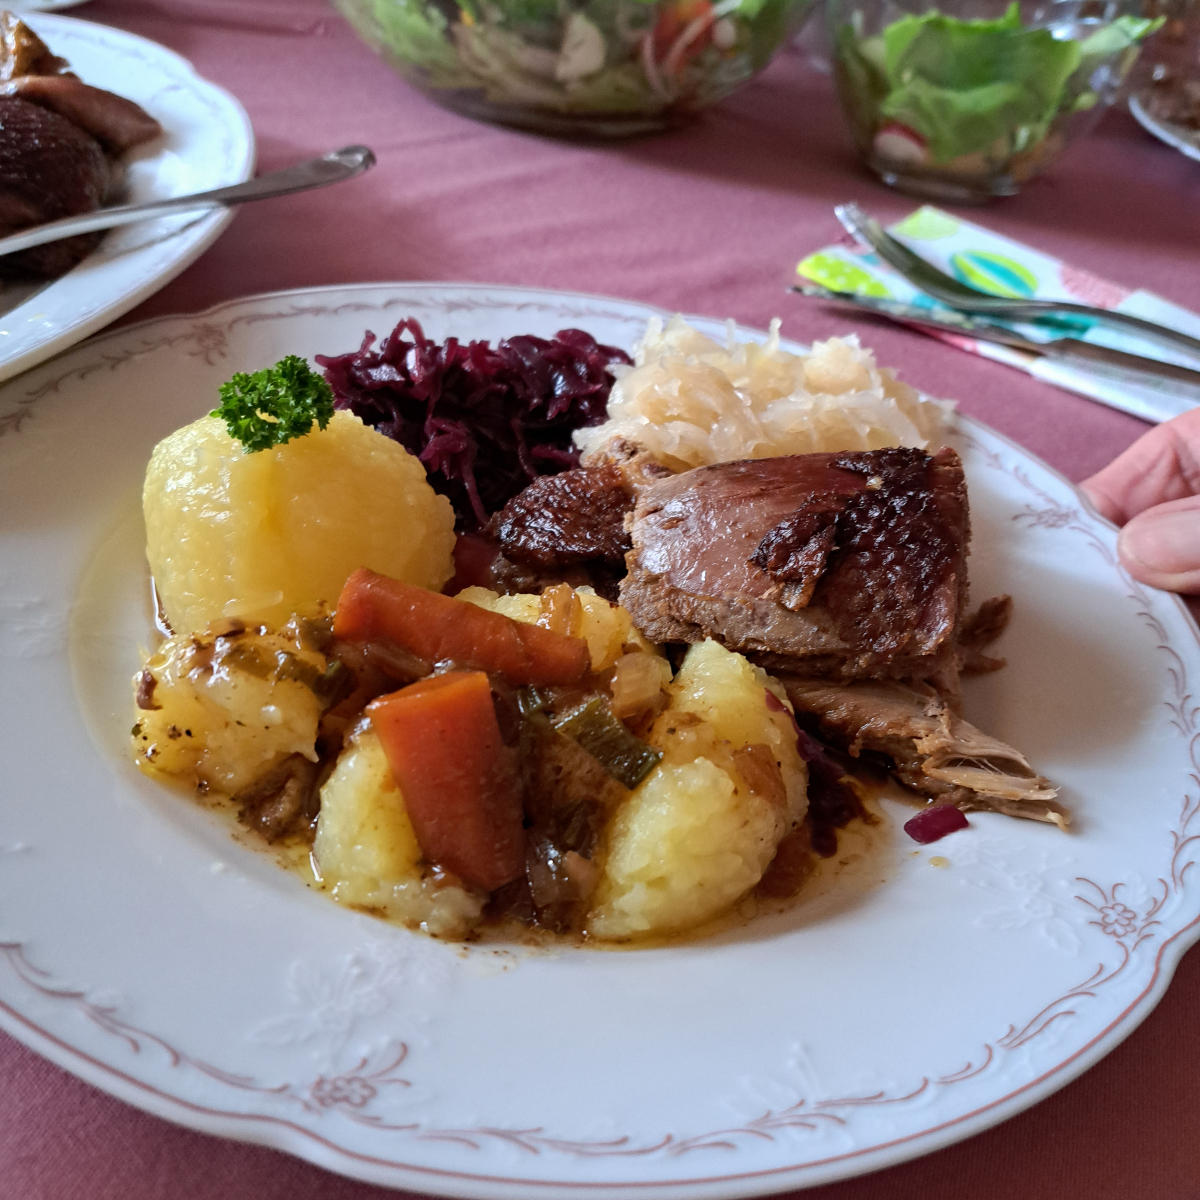 A plate featuring a succulent piece of roasted duck, a sliced potato dumpling bathed in rich gravy, and a served with blaukraut and sauerkraut.